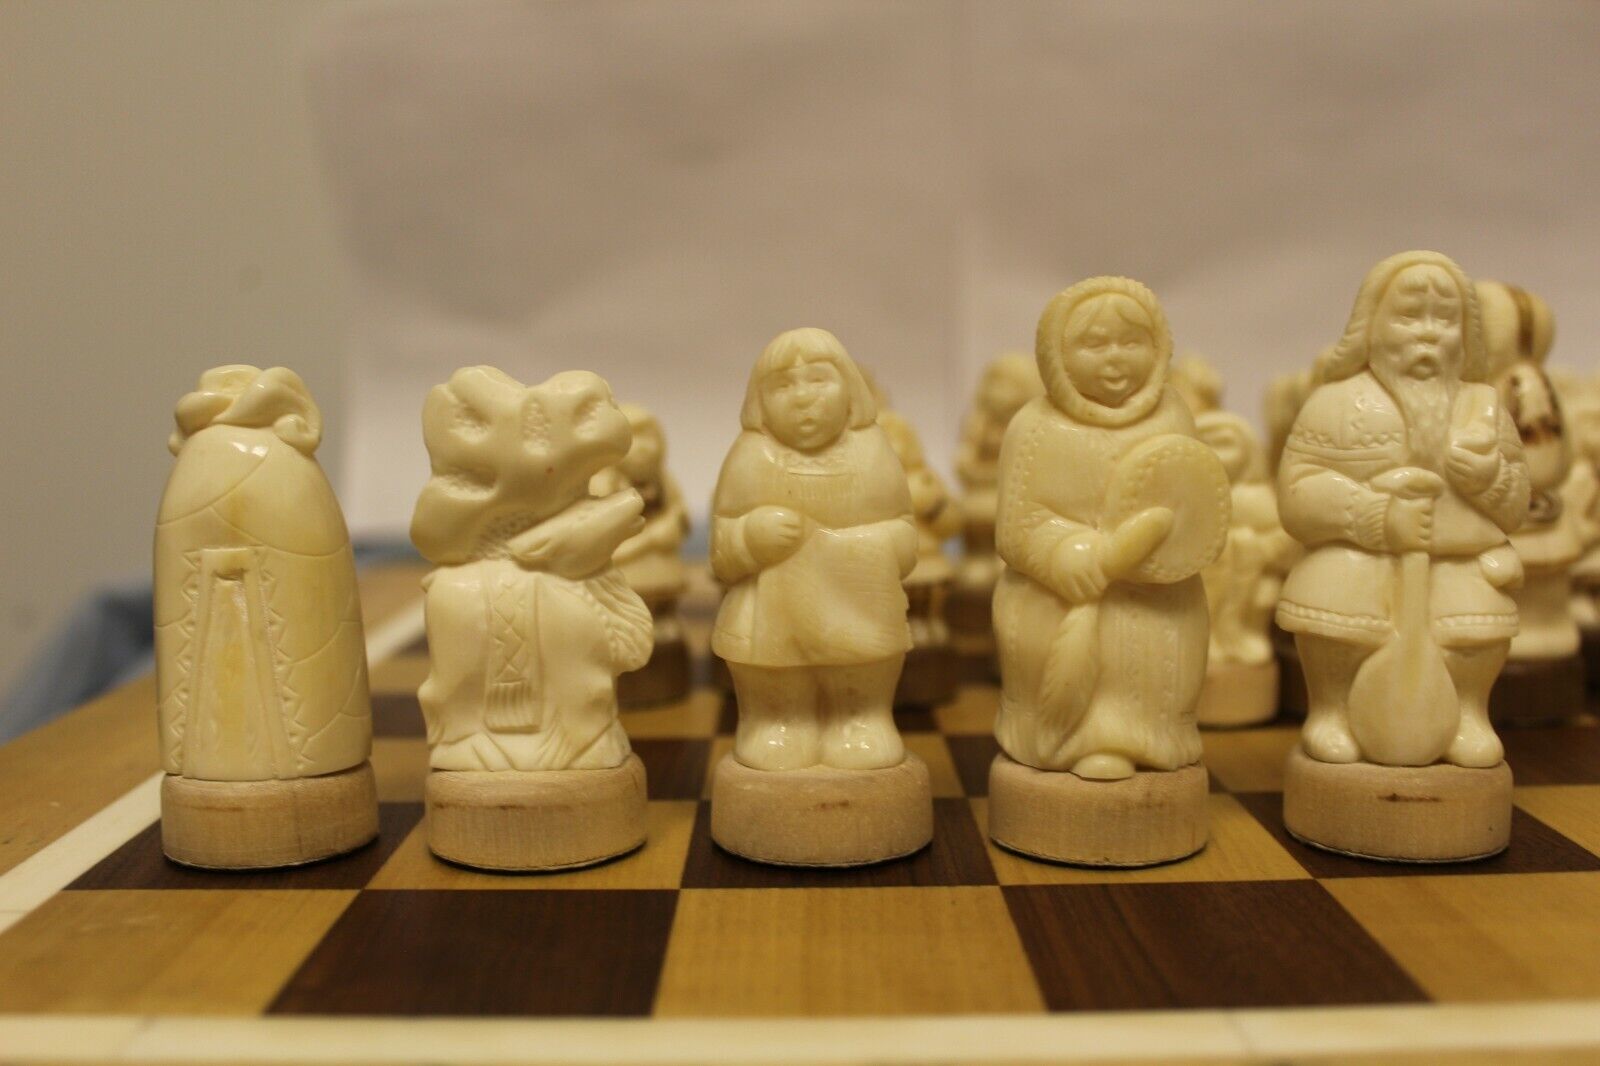 11921.Vintage Chess Pieces from Nothern Part of Russia. Extremely delicate work